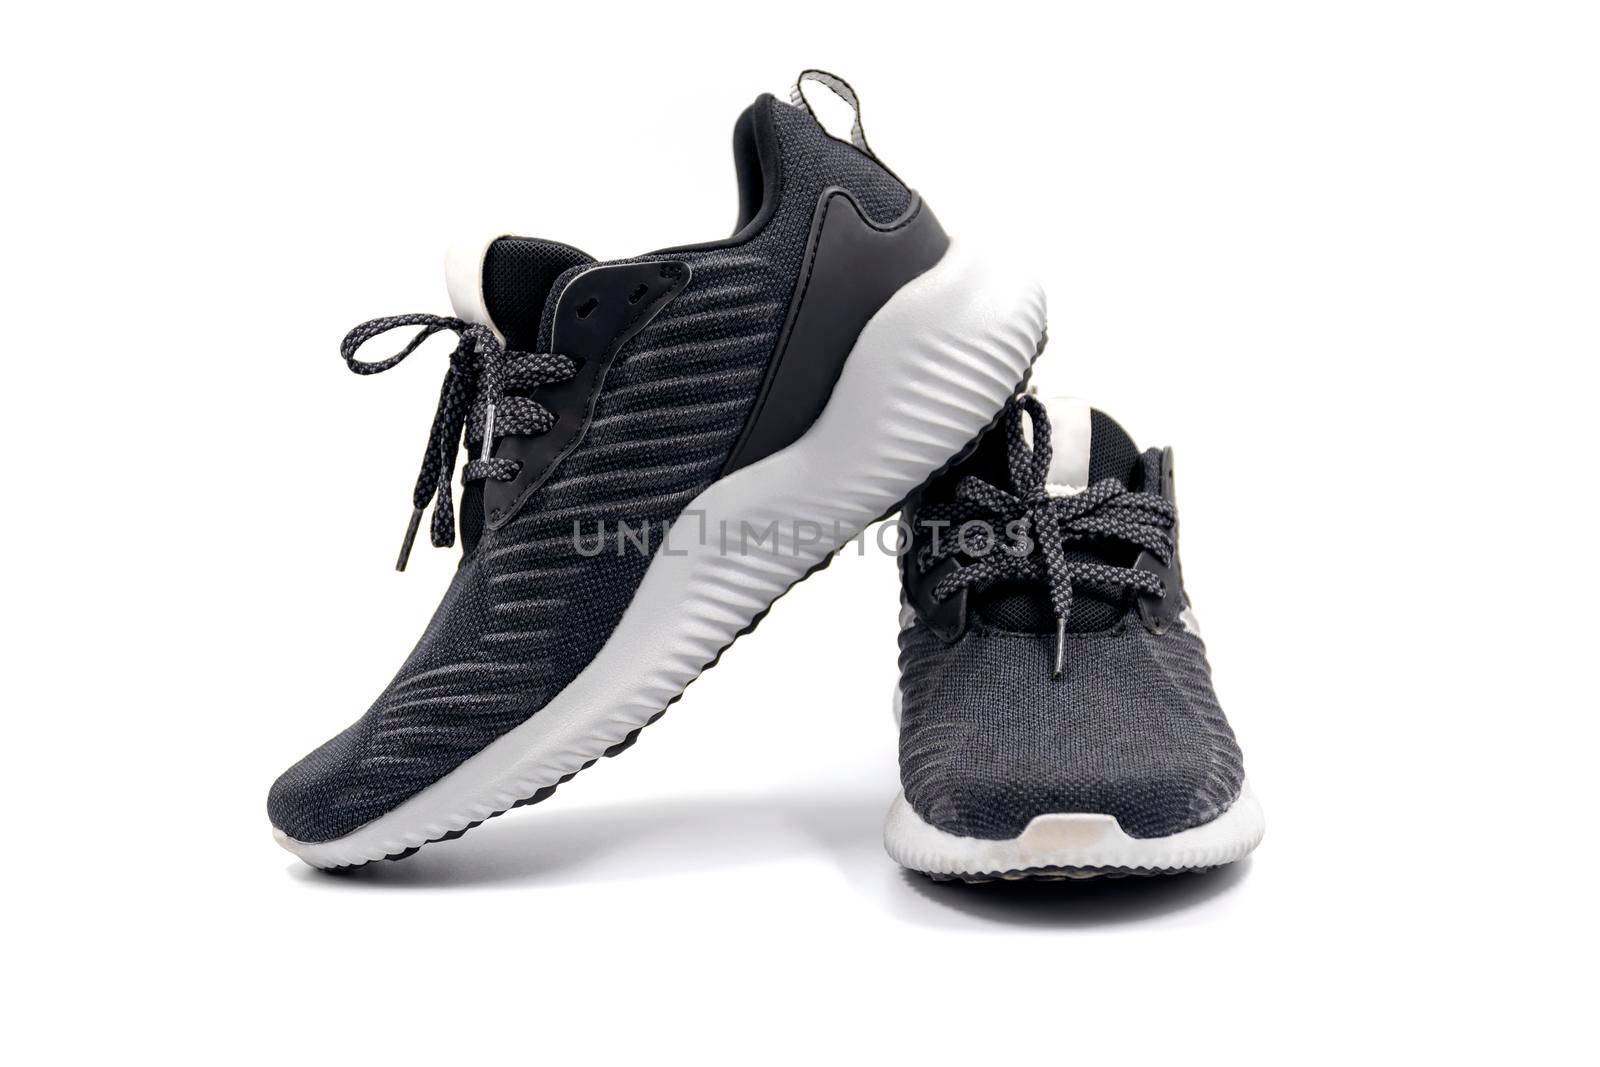 Pair of black color fashion sport shoes isolated on white background.